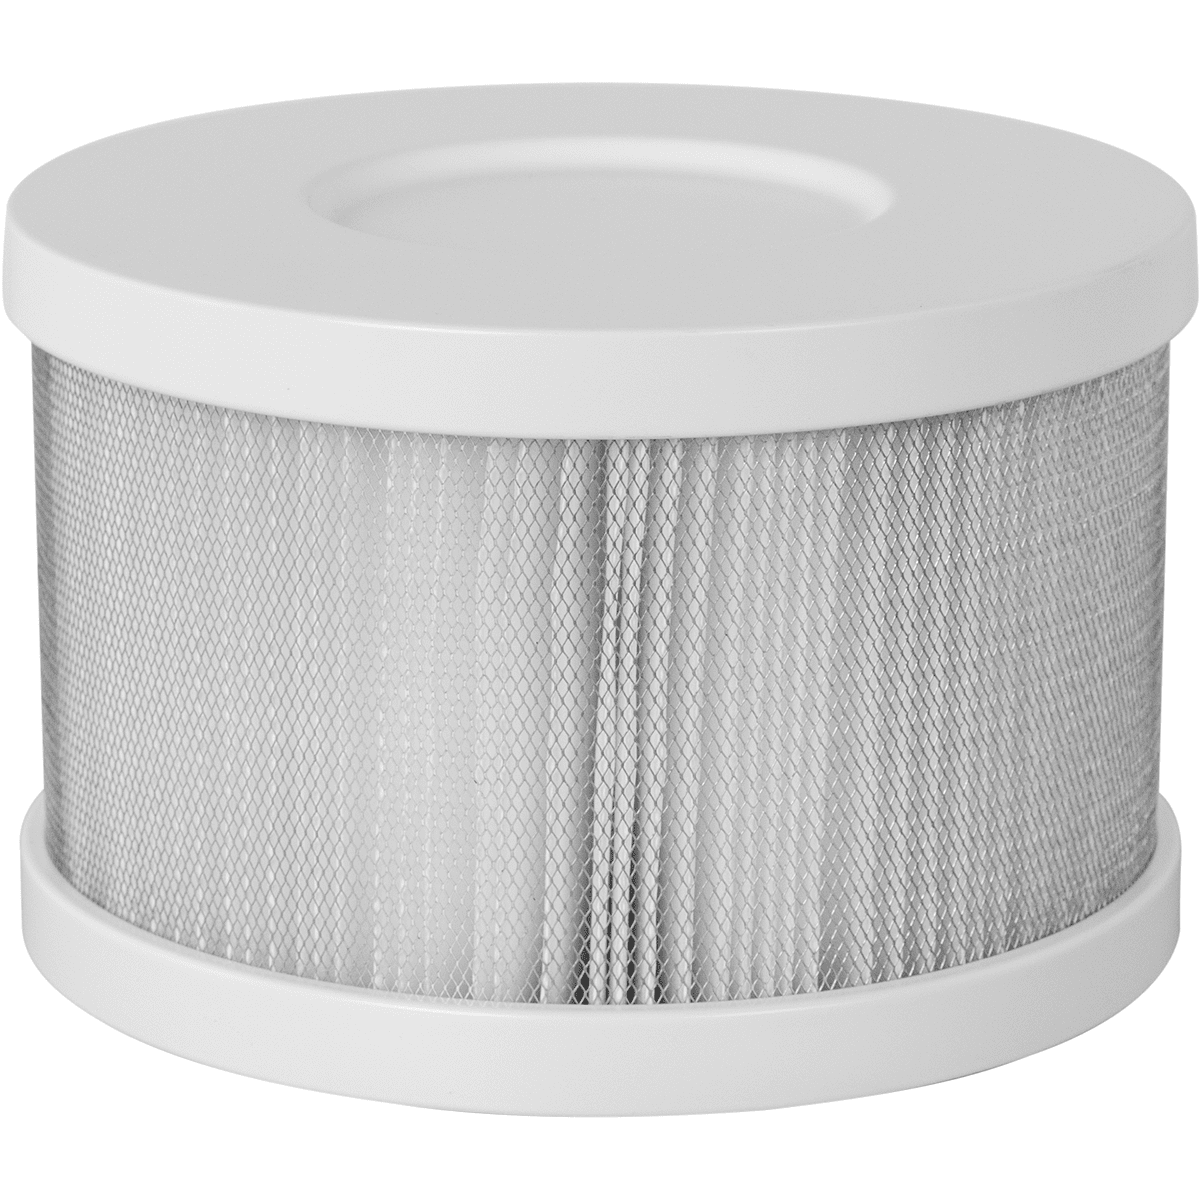 Amaircare Replacement HEPA Filter Snap On Cartridge for Roomaid - White